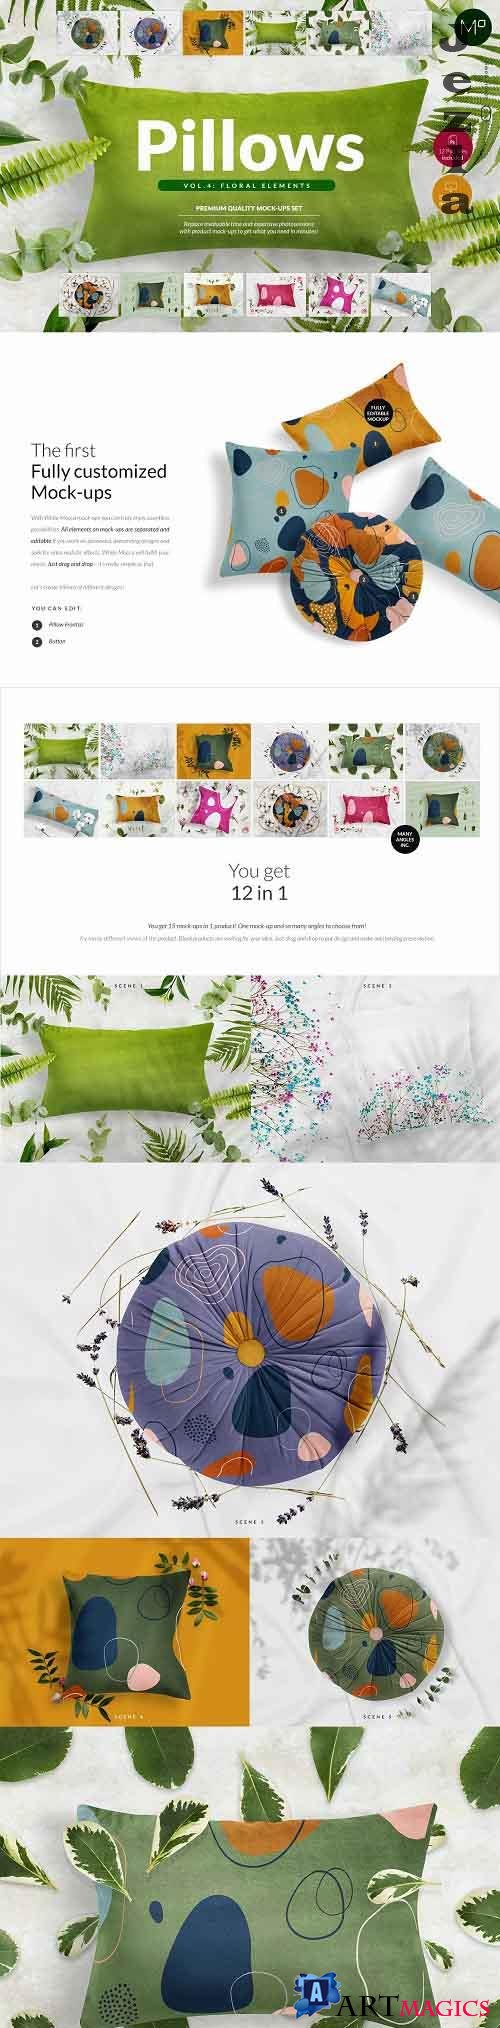 CreativeMarket - Pillows vol.4: with floral elements 5367751